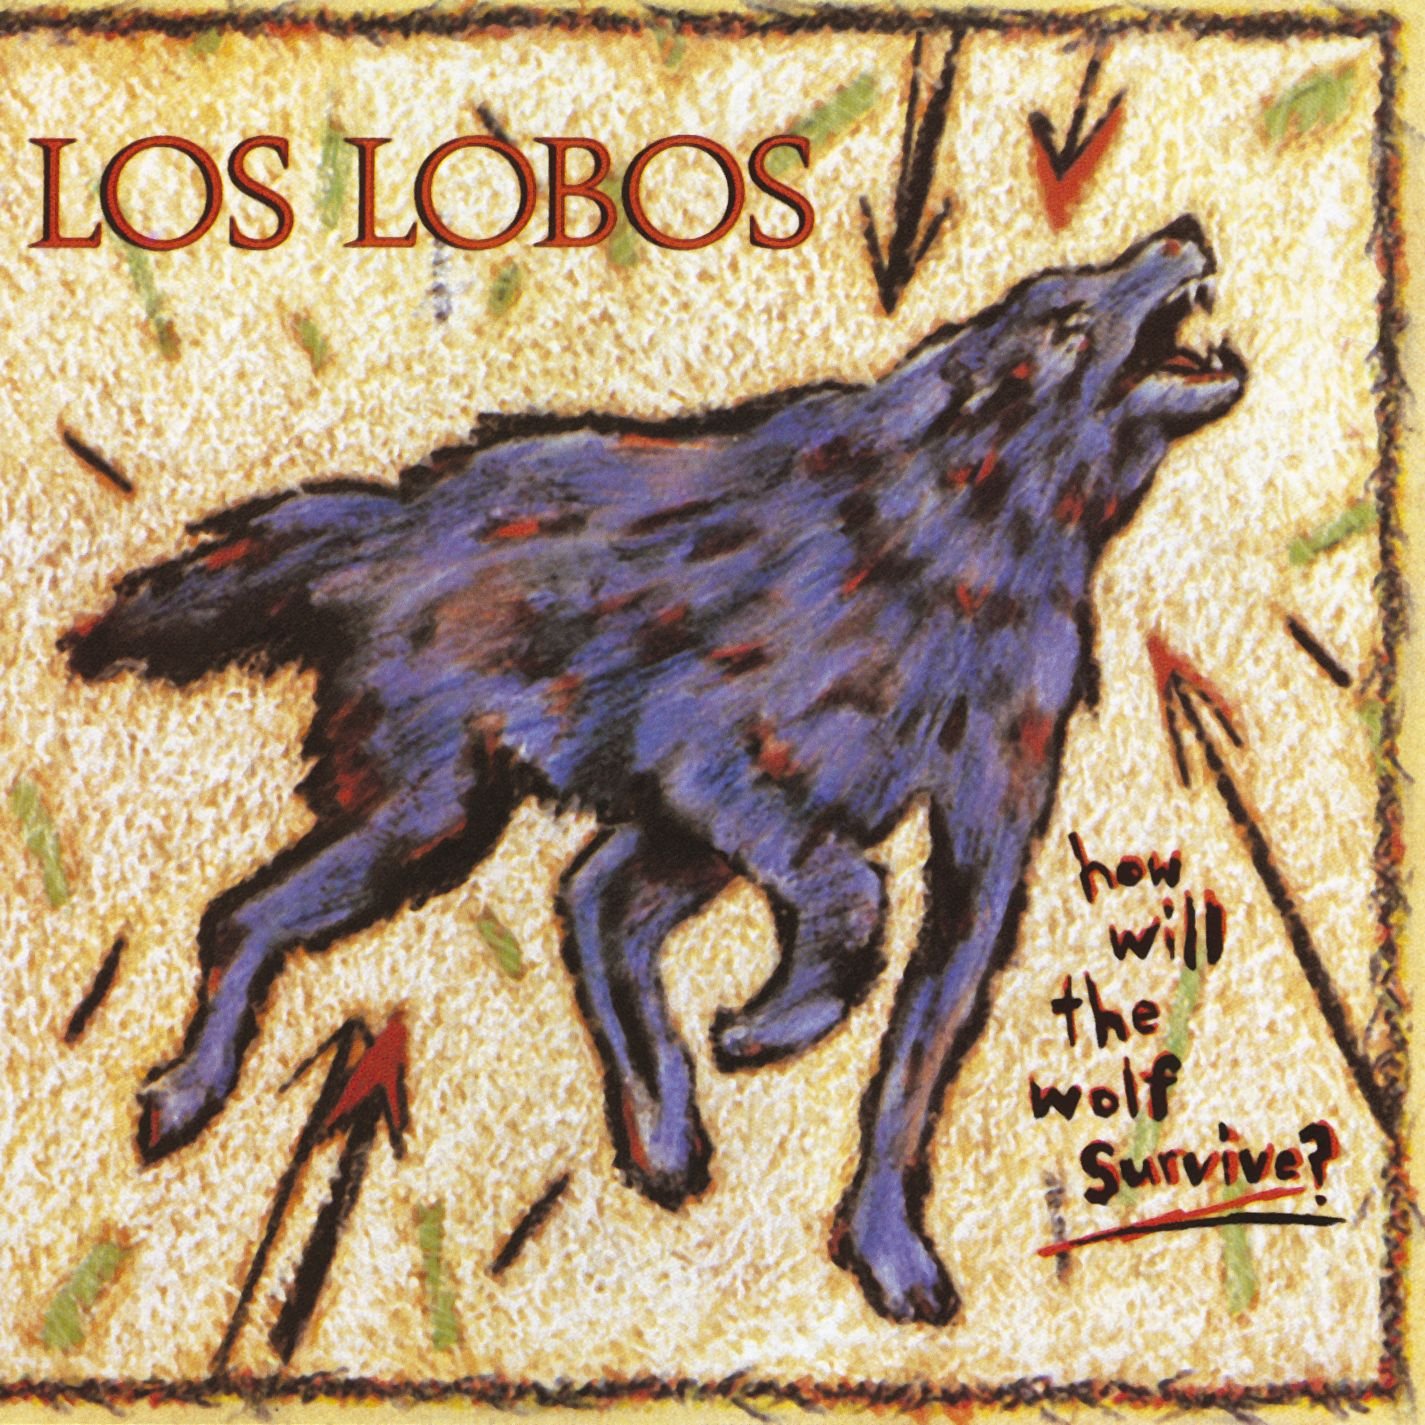 LOS LOBOS | How The Wolf Will Survive? (1984)